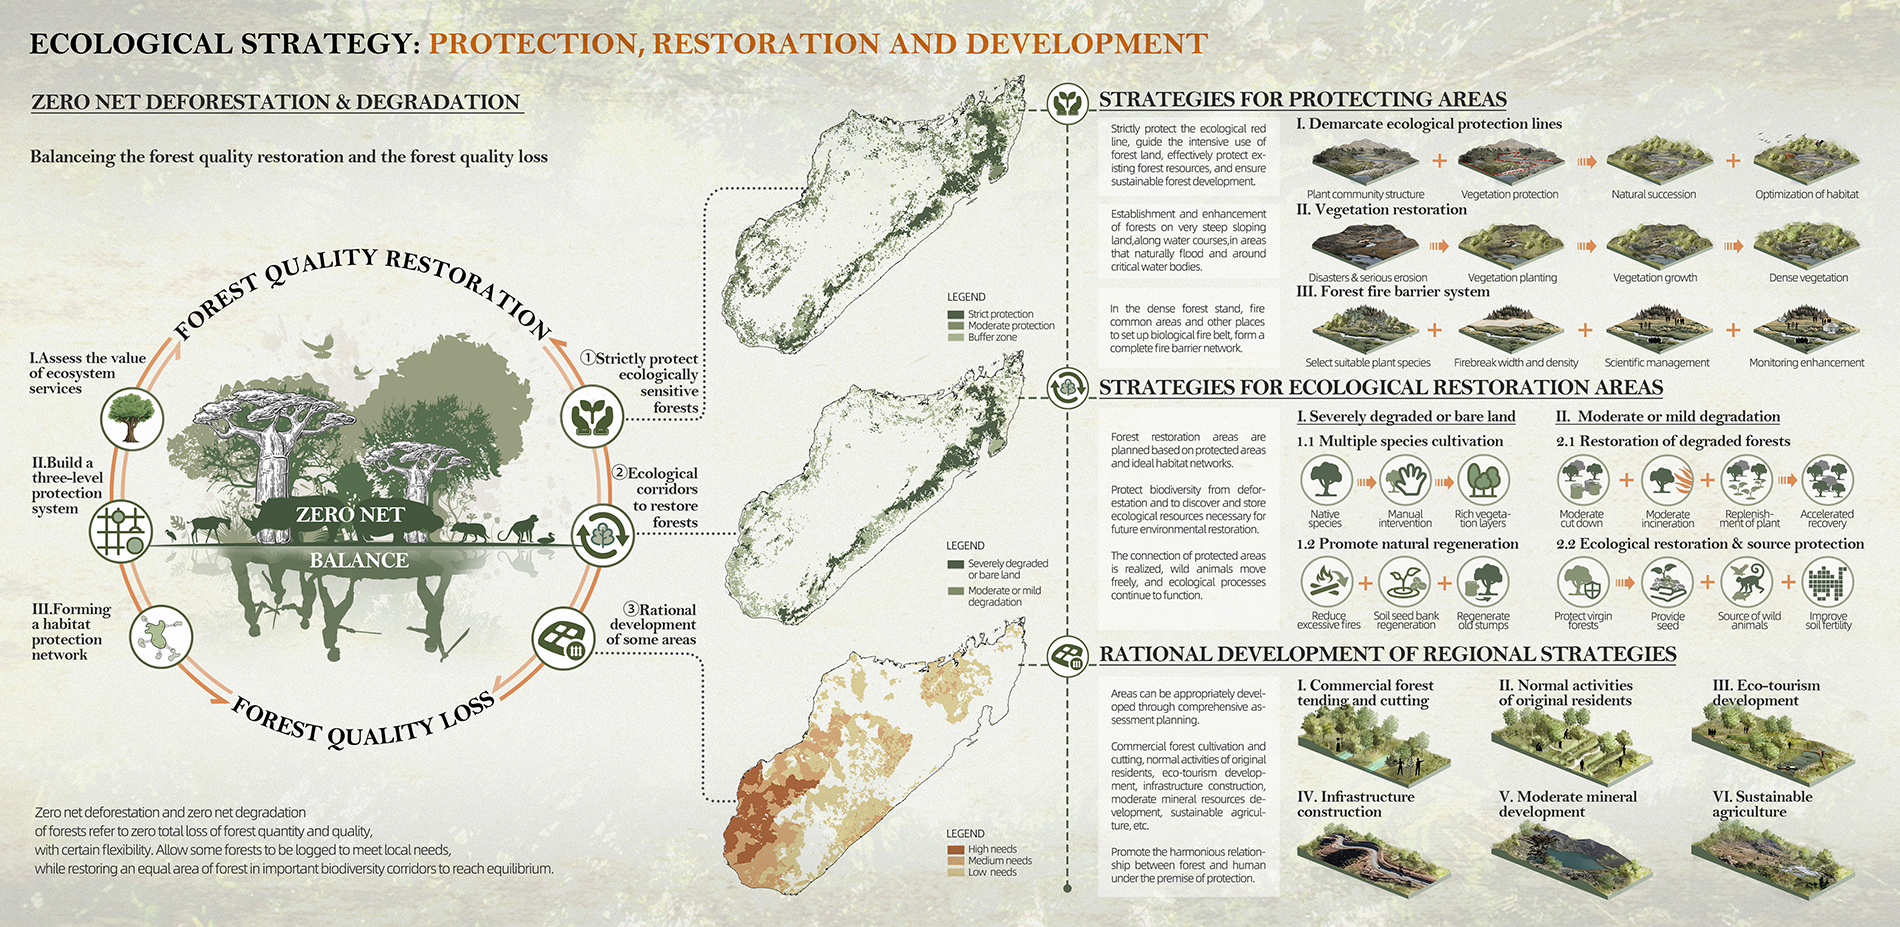 Ecological Strategy: Protection, Restoration and Development